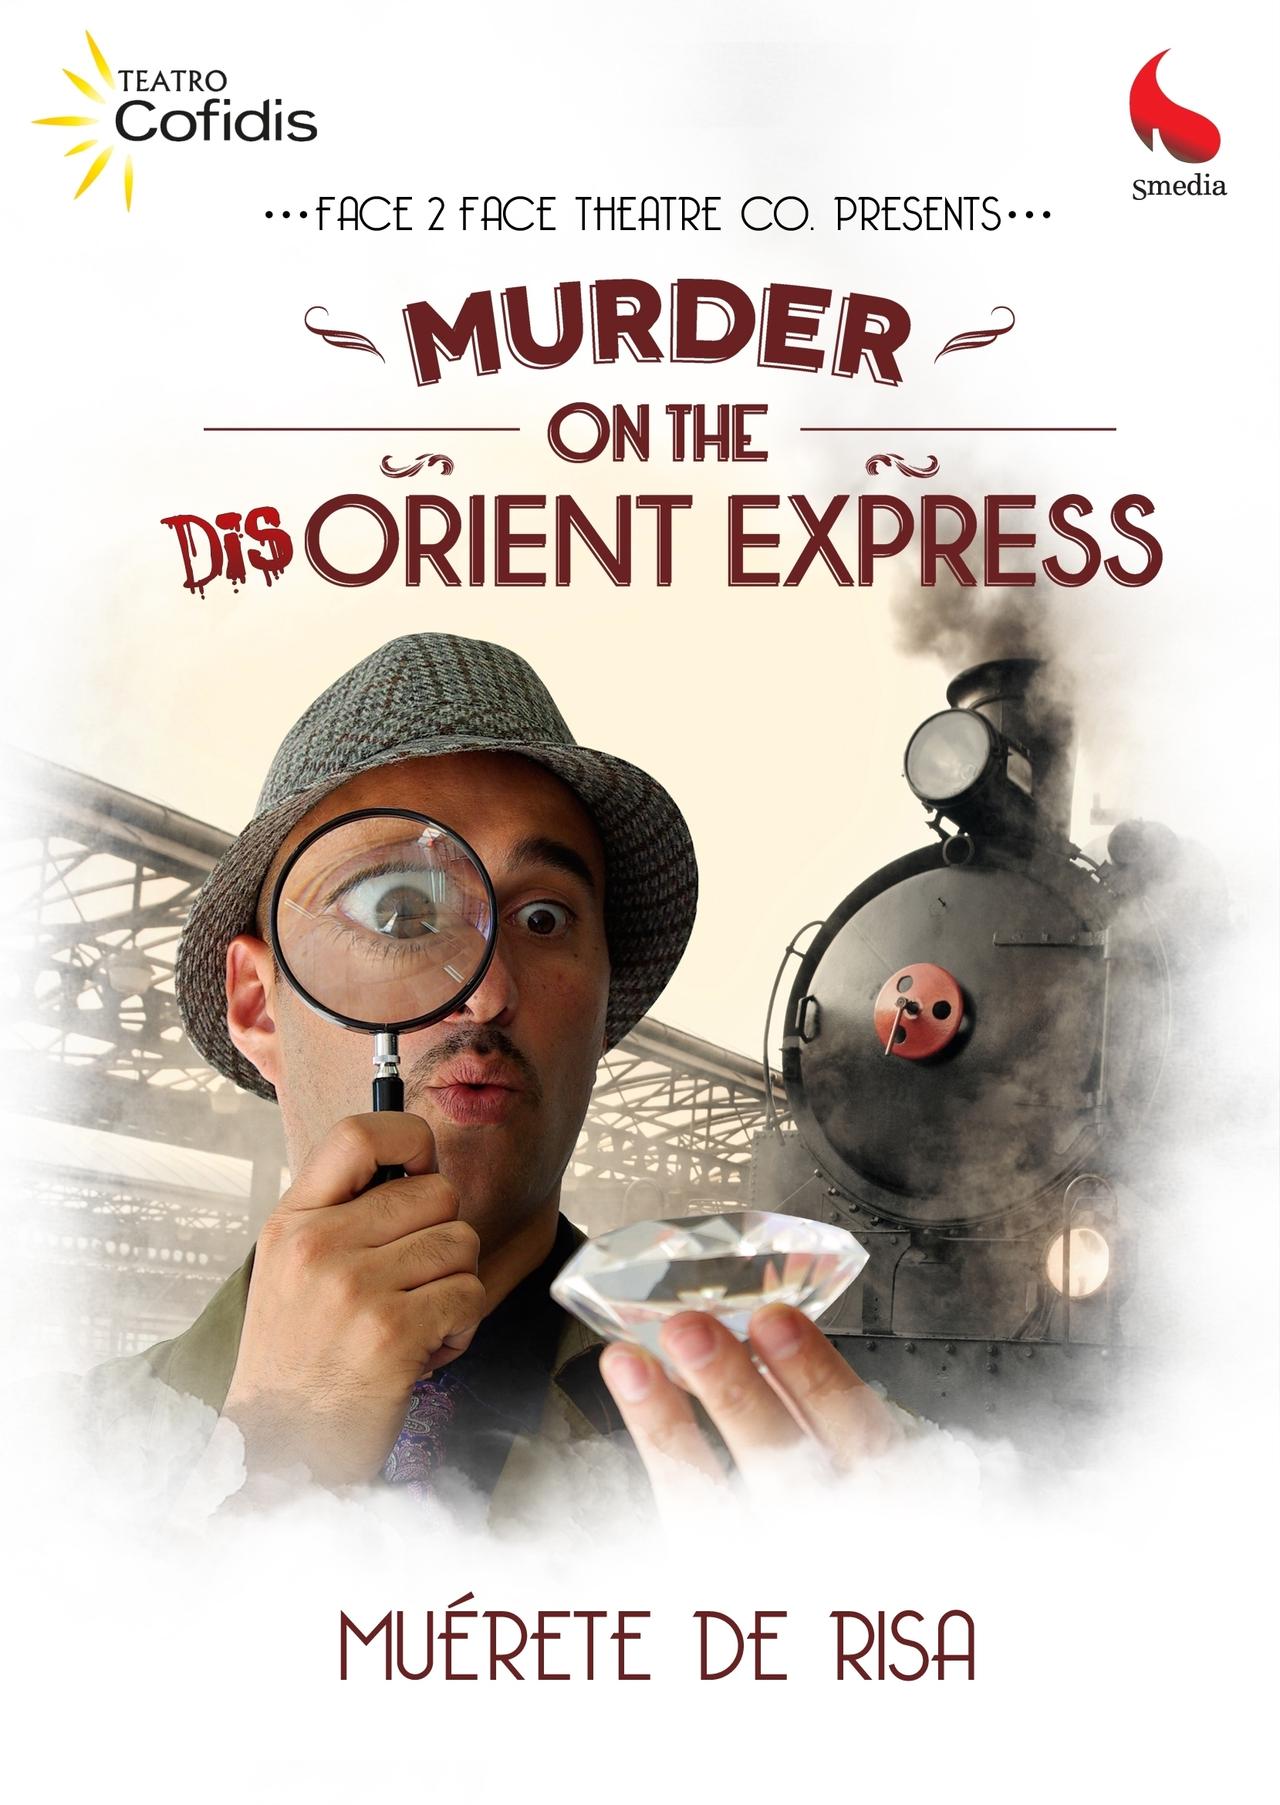 Murder on the Dis-Orient Express